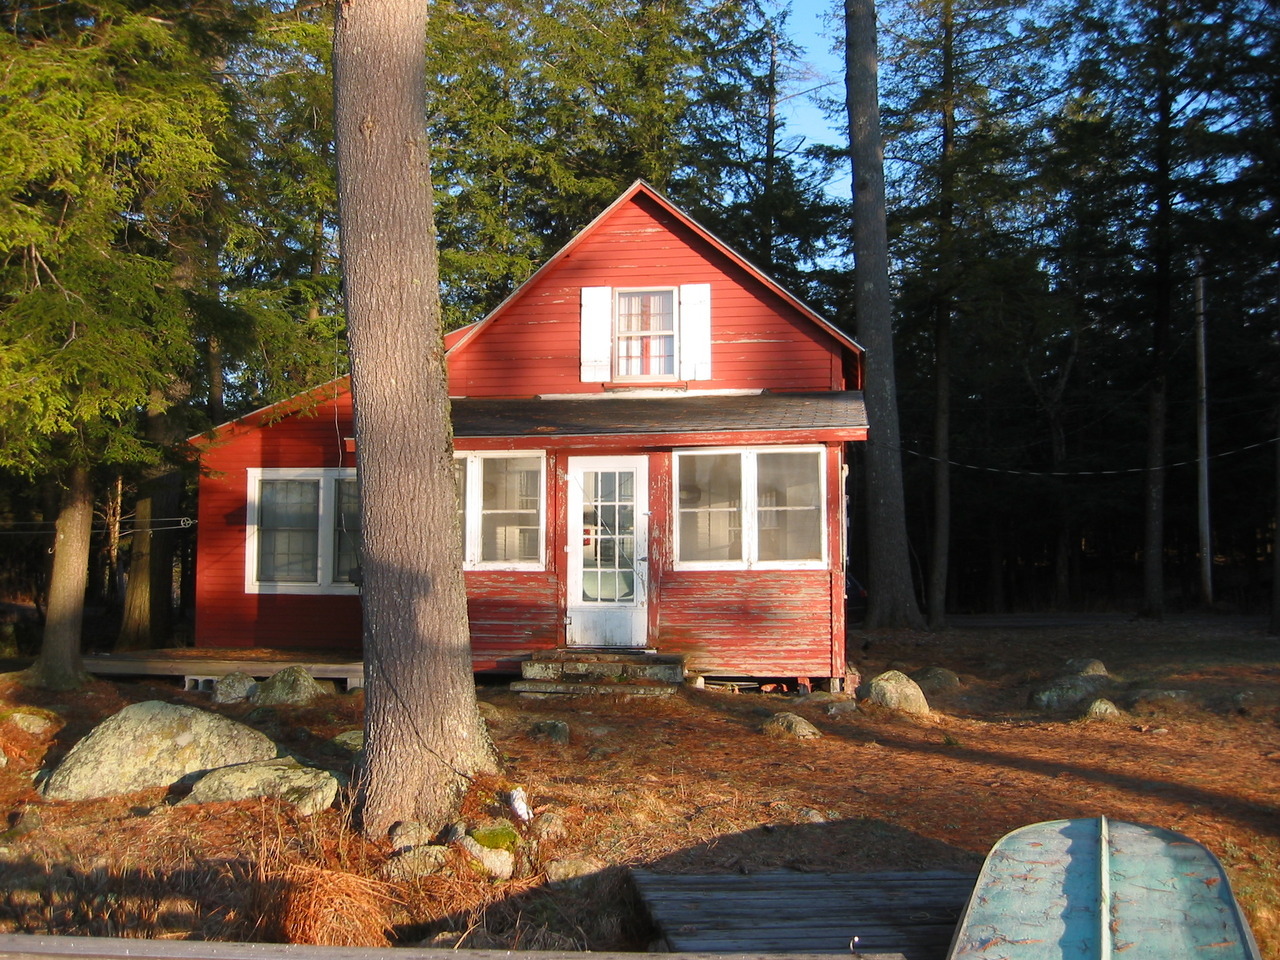 Cabin on Sterling Pond in Parishville, NY.
Submitted by Gary Carlson.